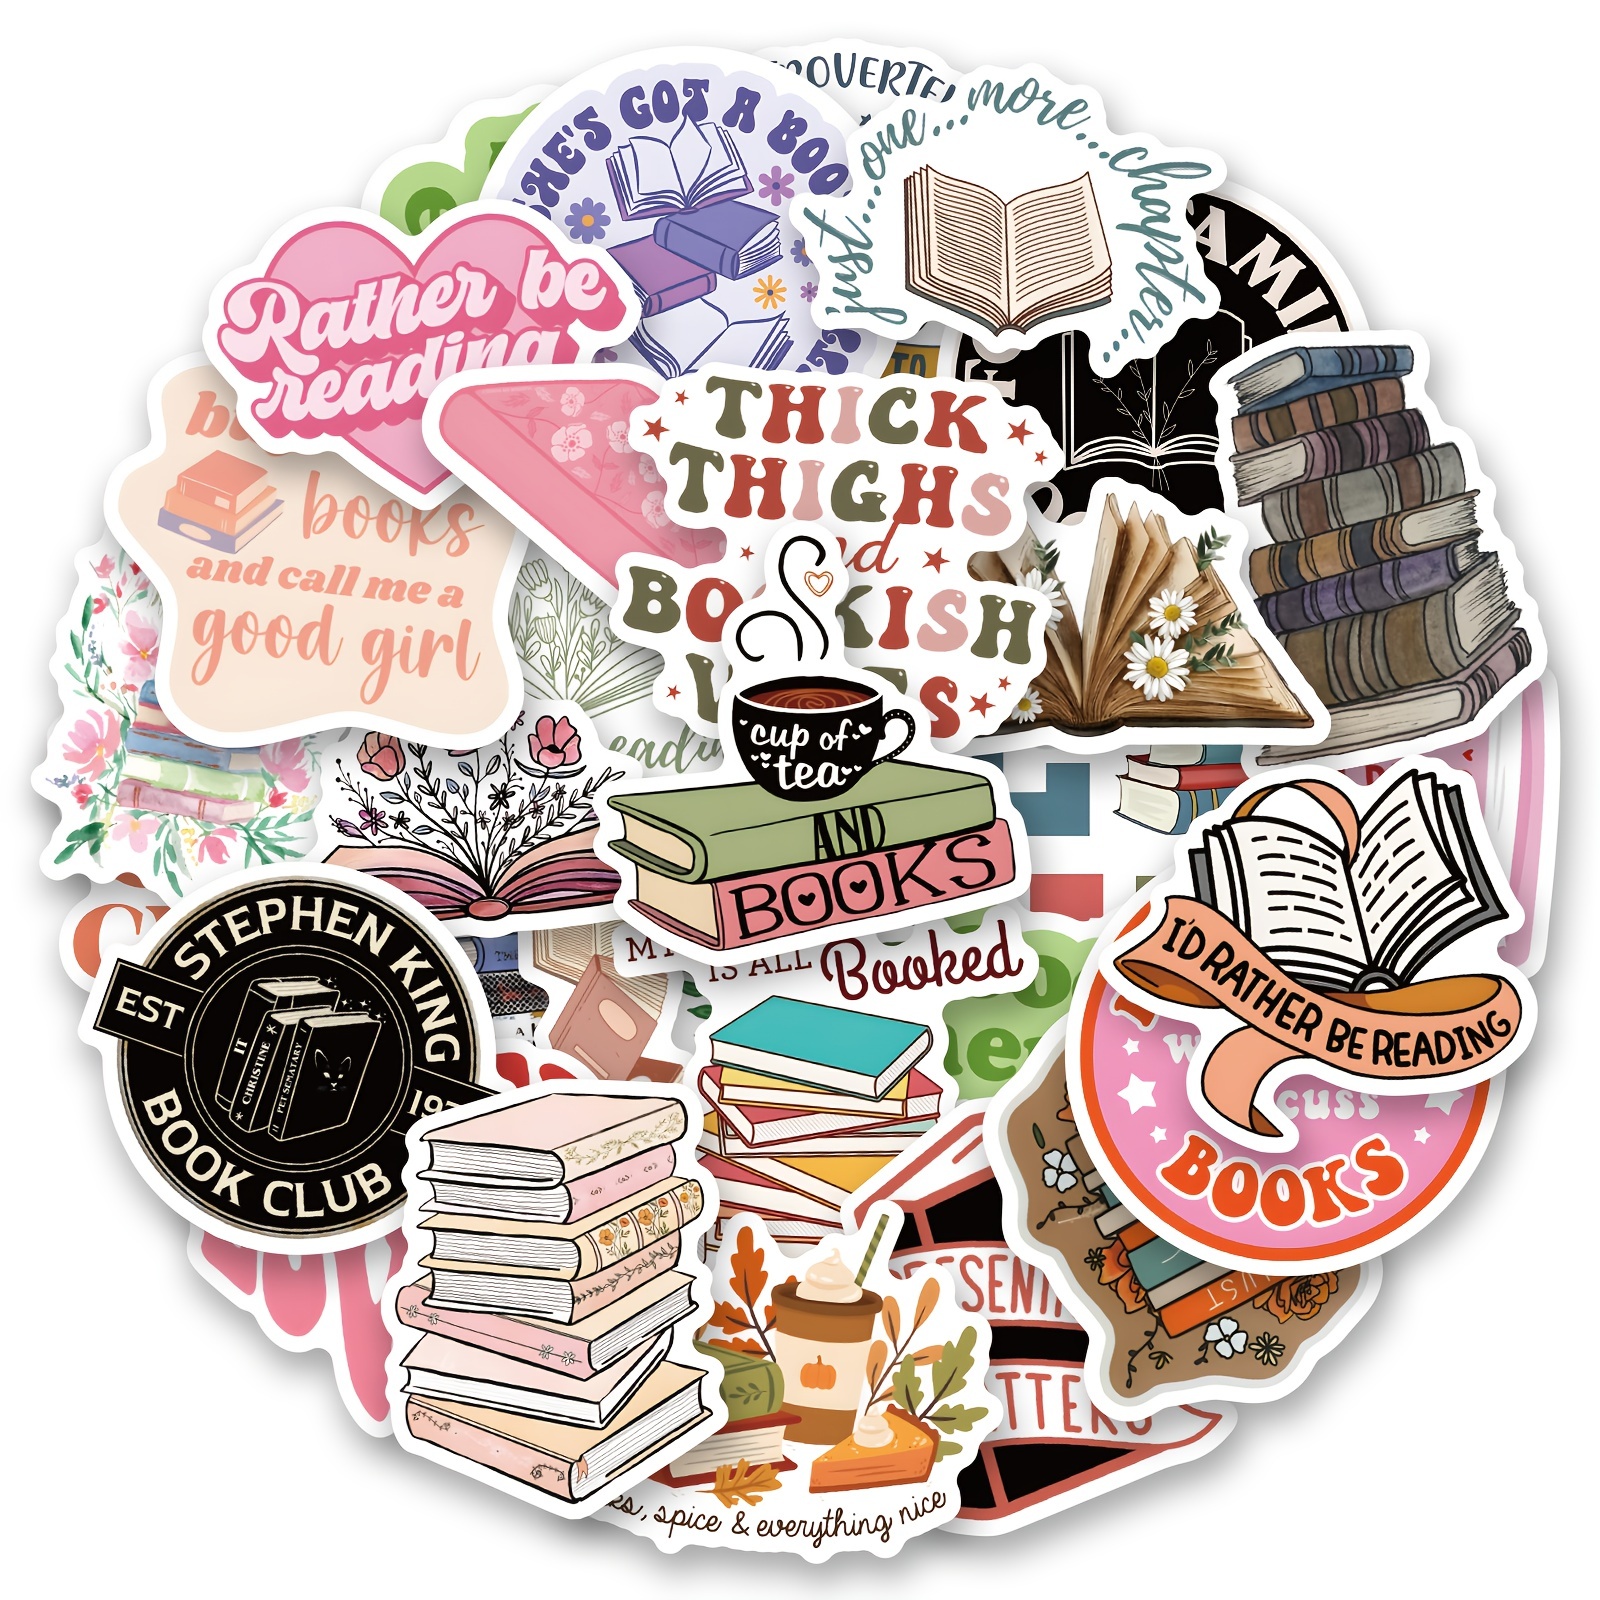 Acotar Stickers for Sale  Cute stickers, Aesthetic stickers, Stickers